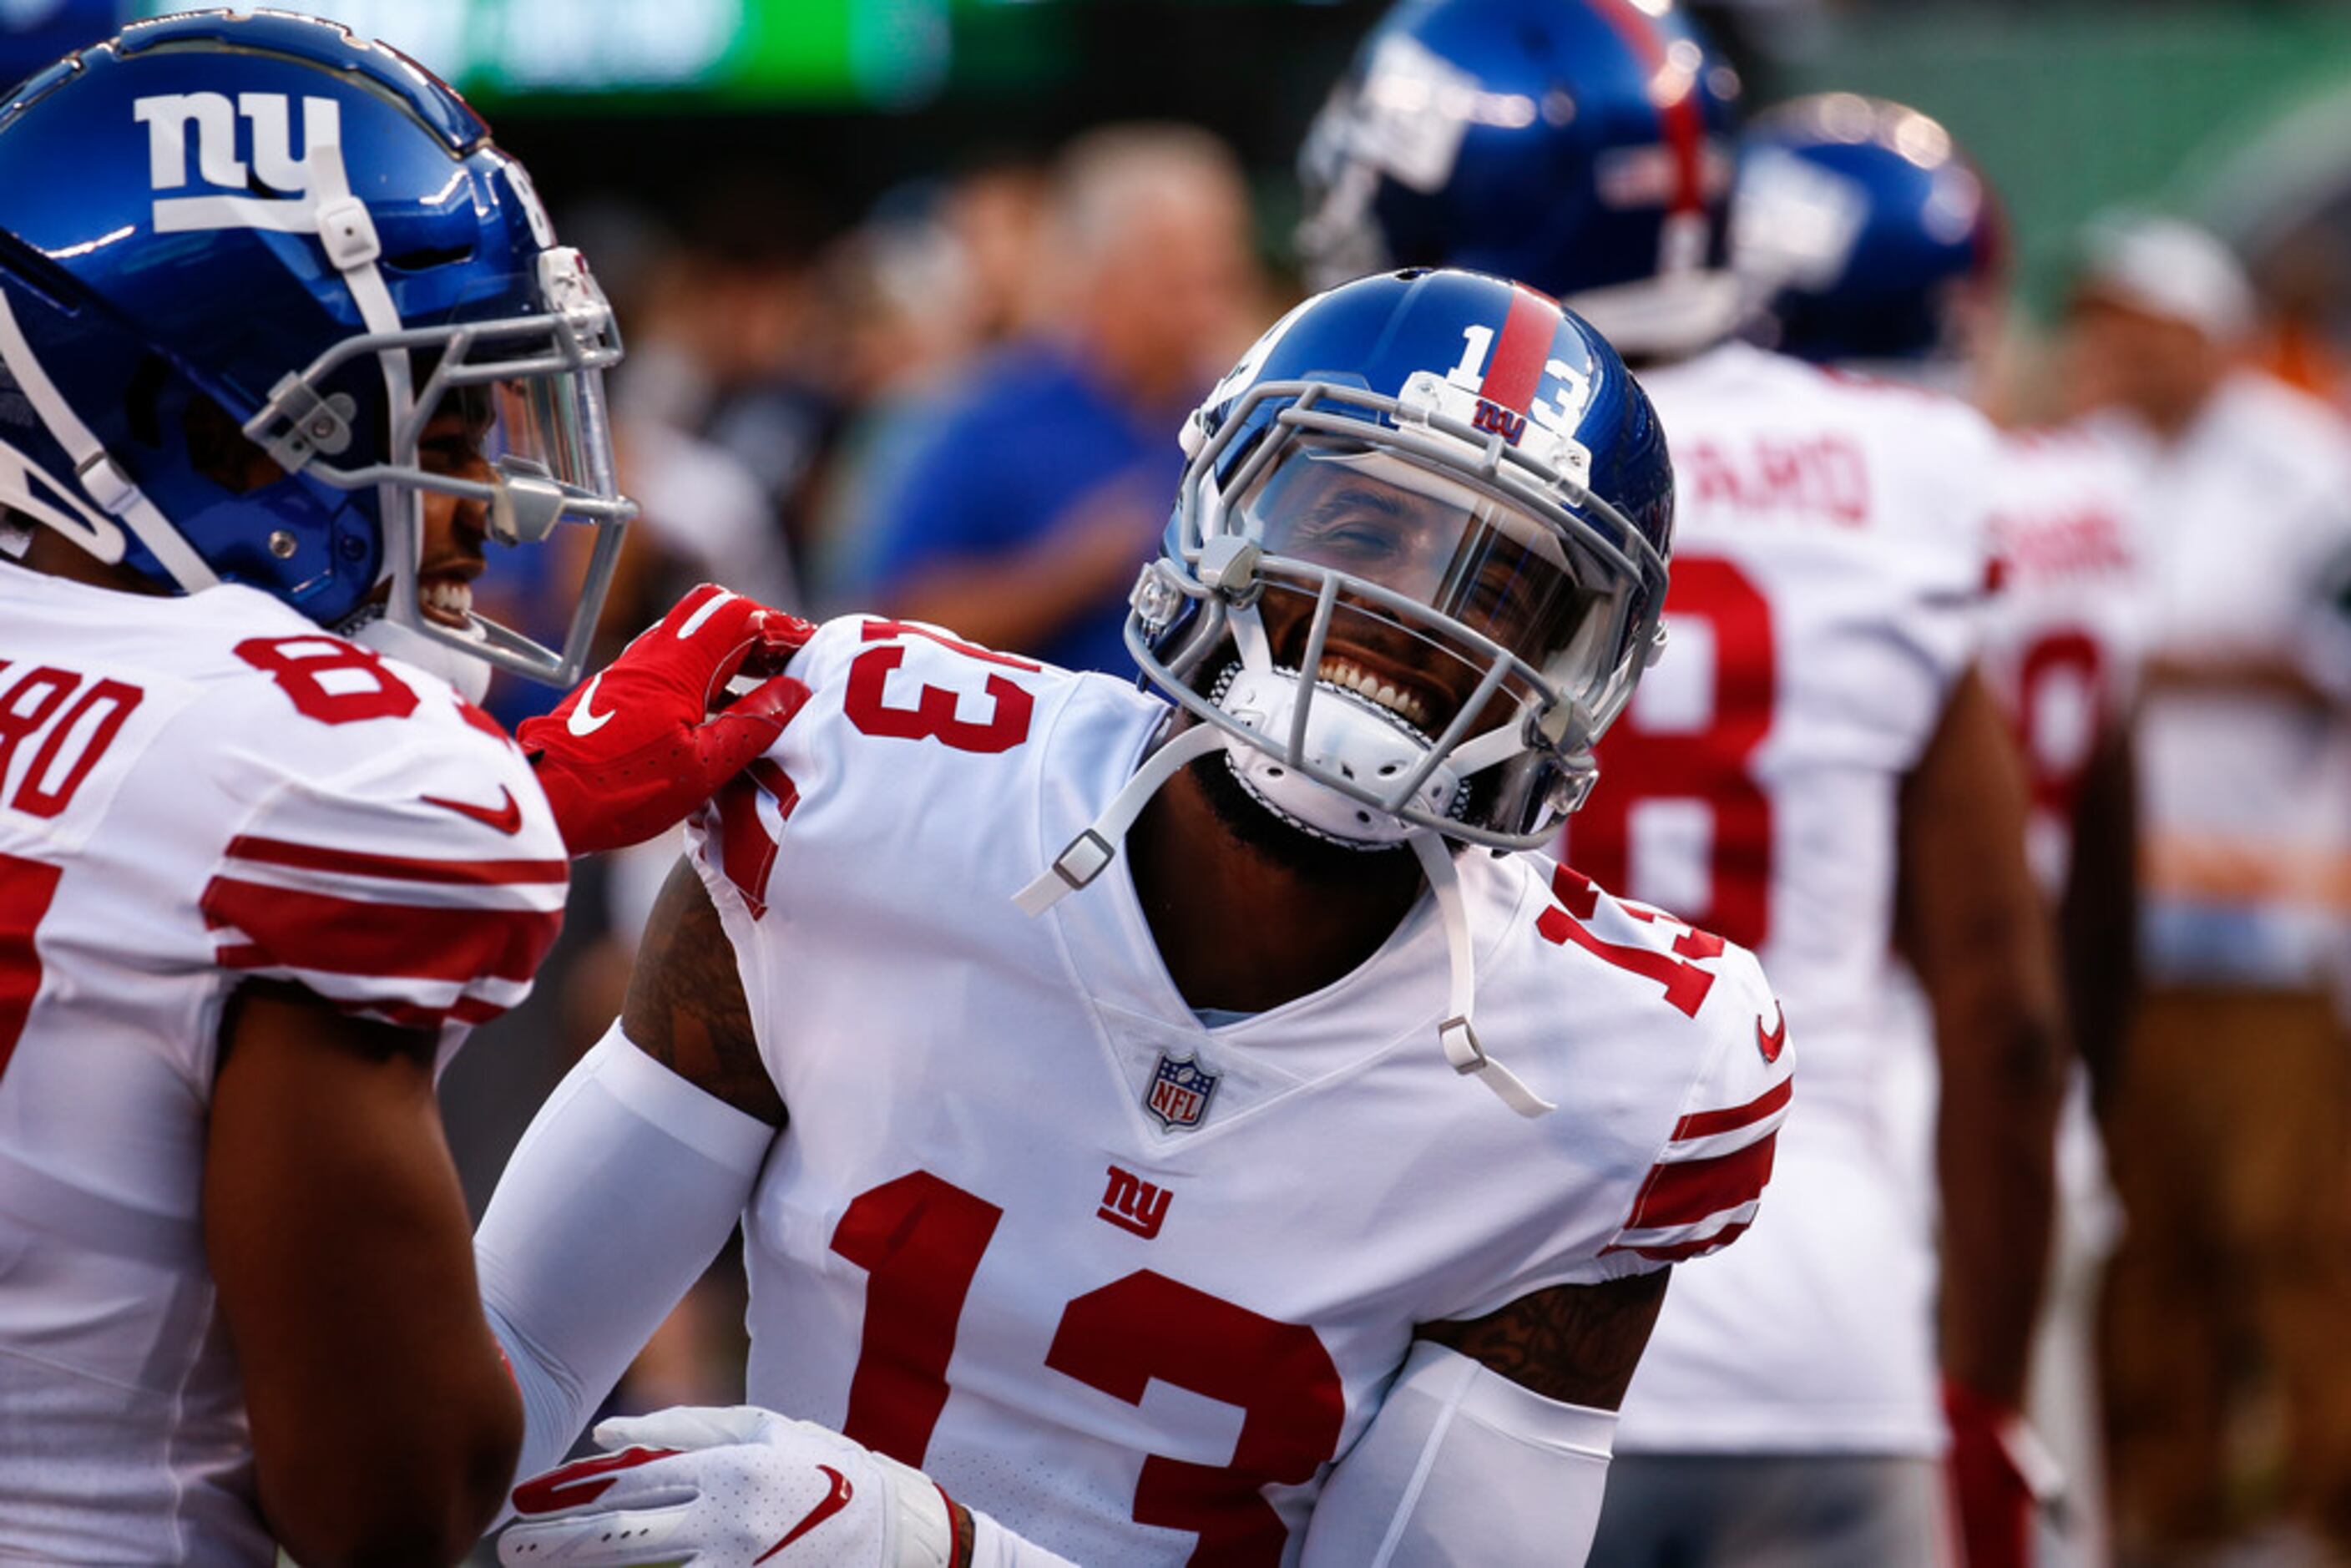 Giants: Odell Beckham Jr. becomes NFL's top-paid WR with new contract